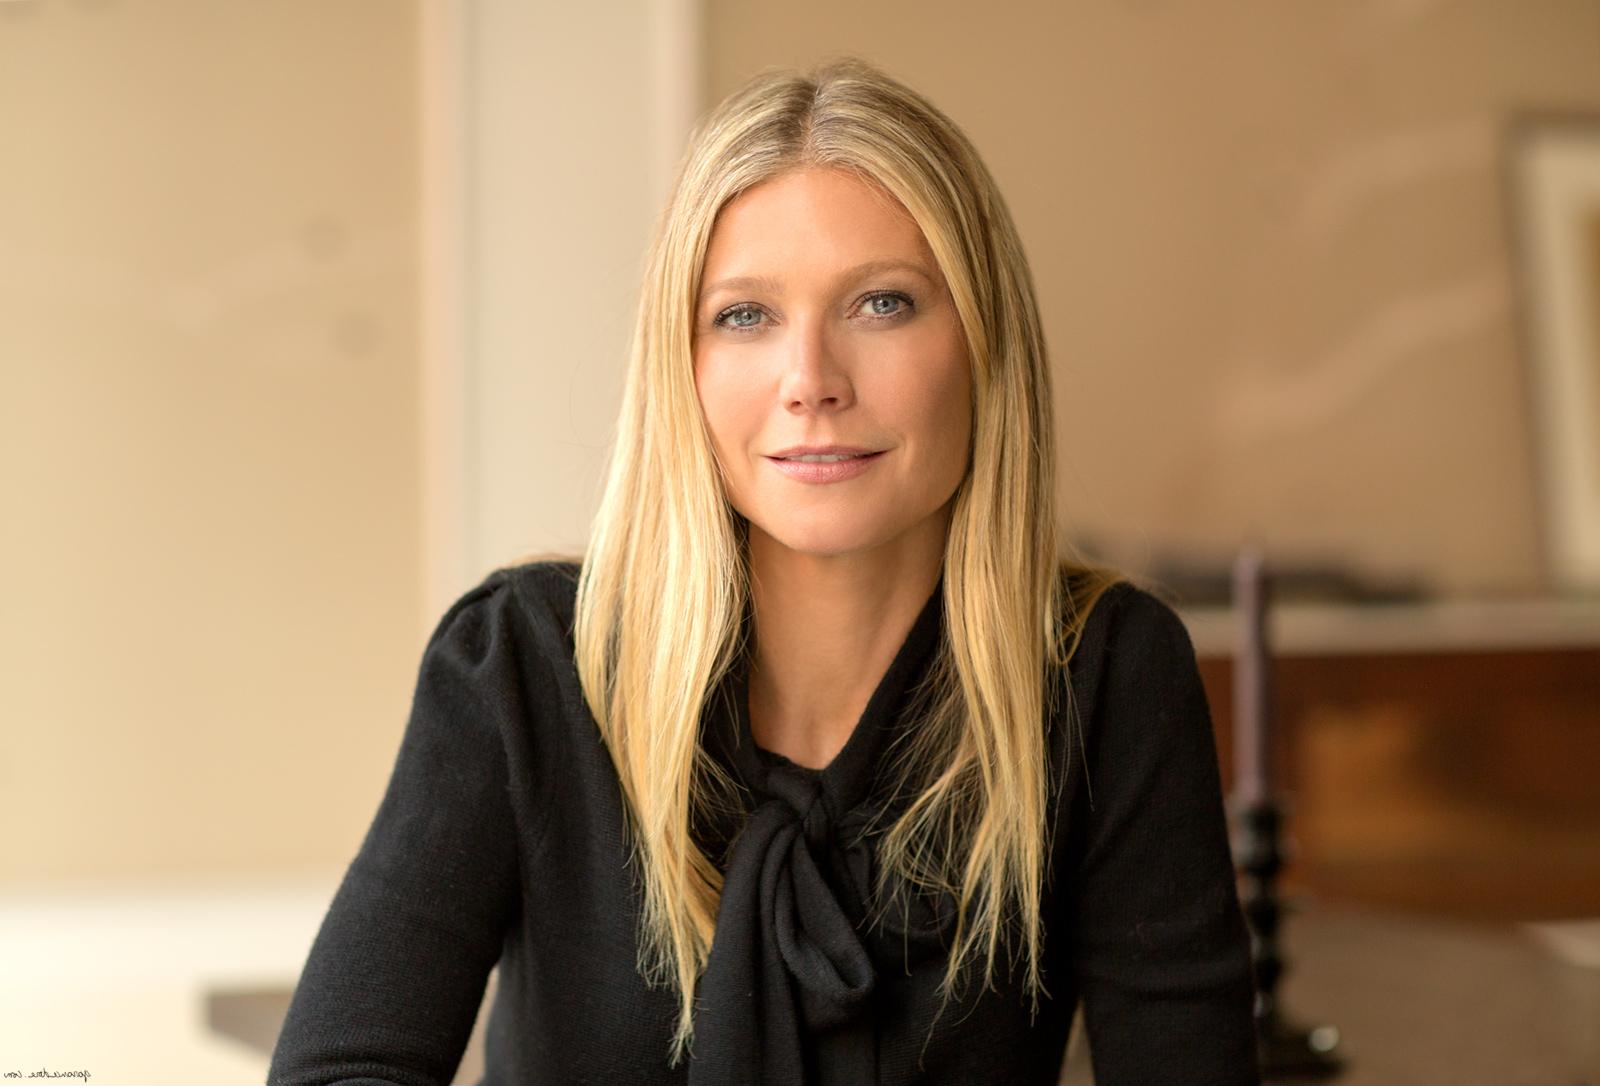 A Portrait Picture Of Actress Gwyneth Paltrow